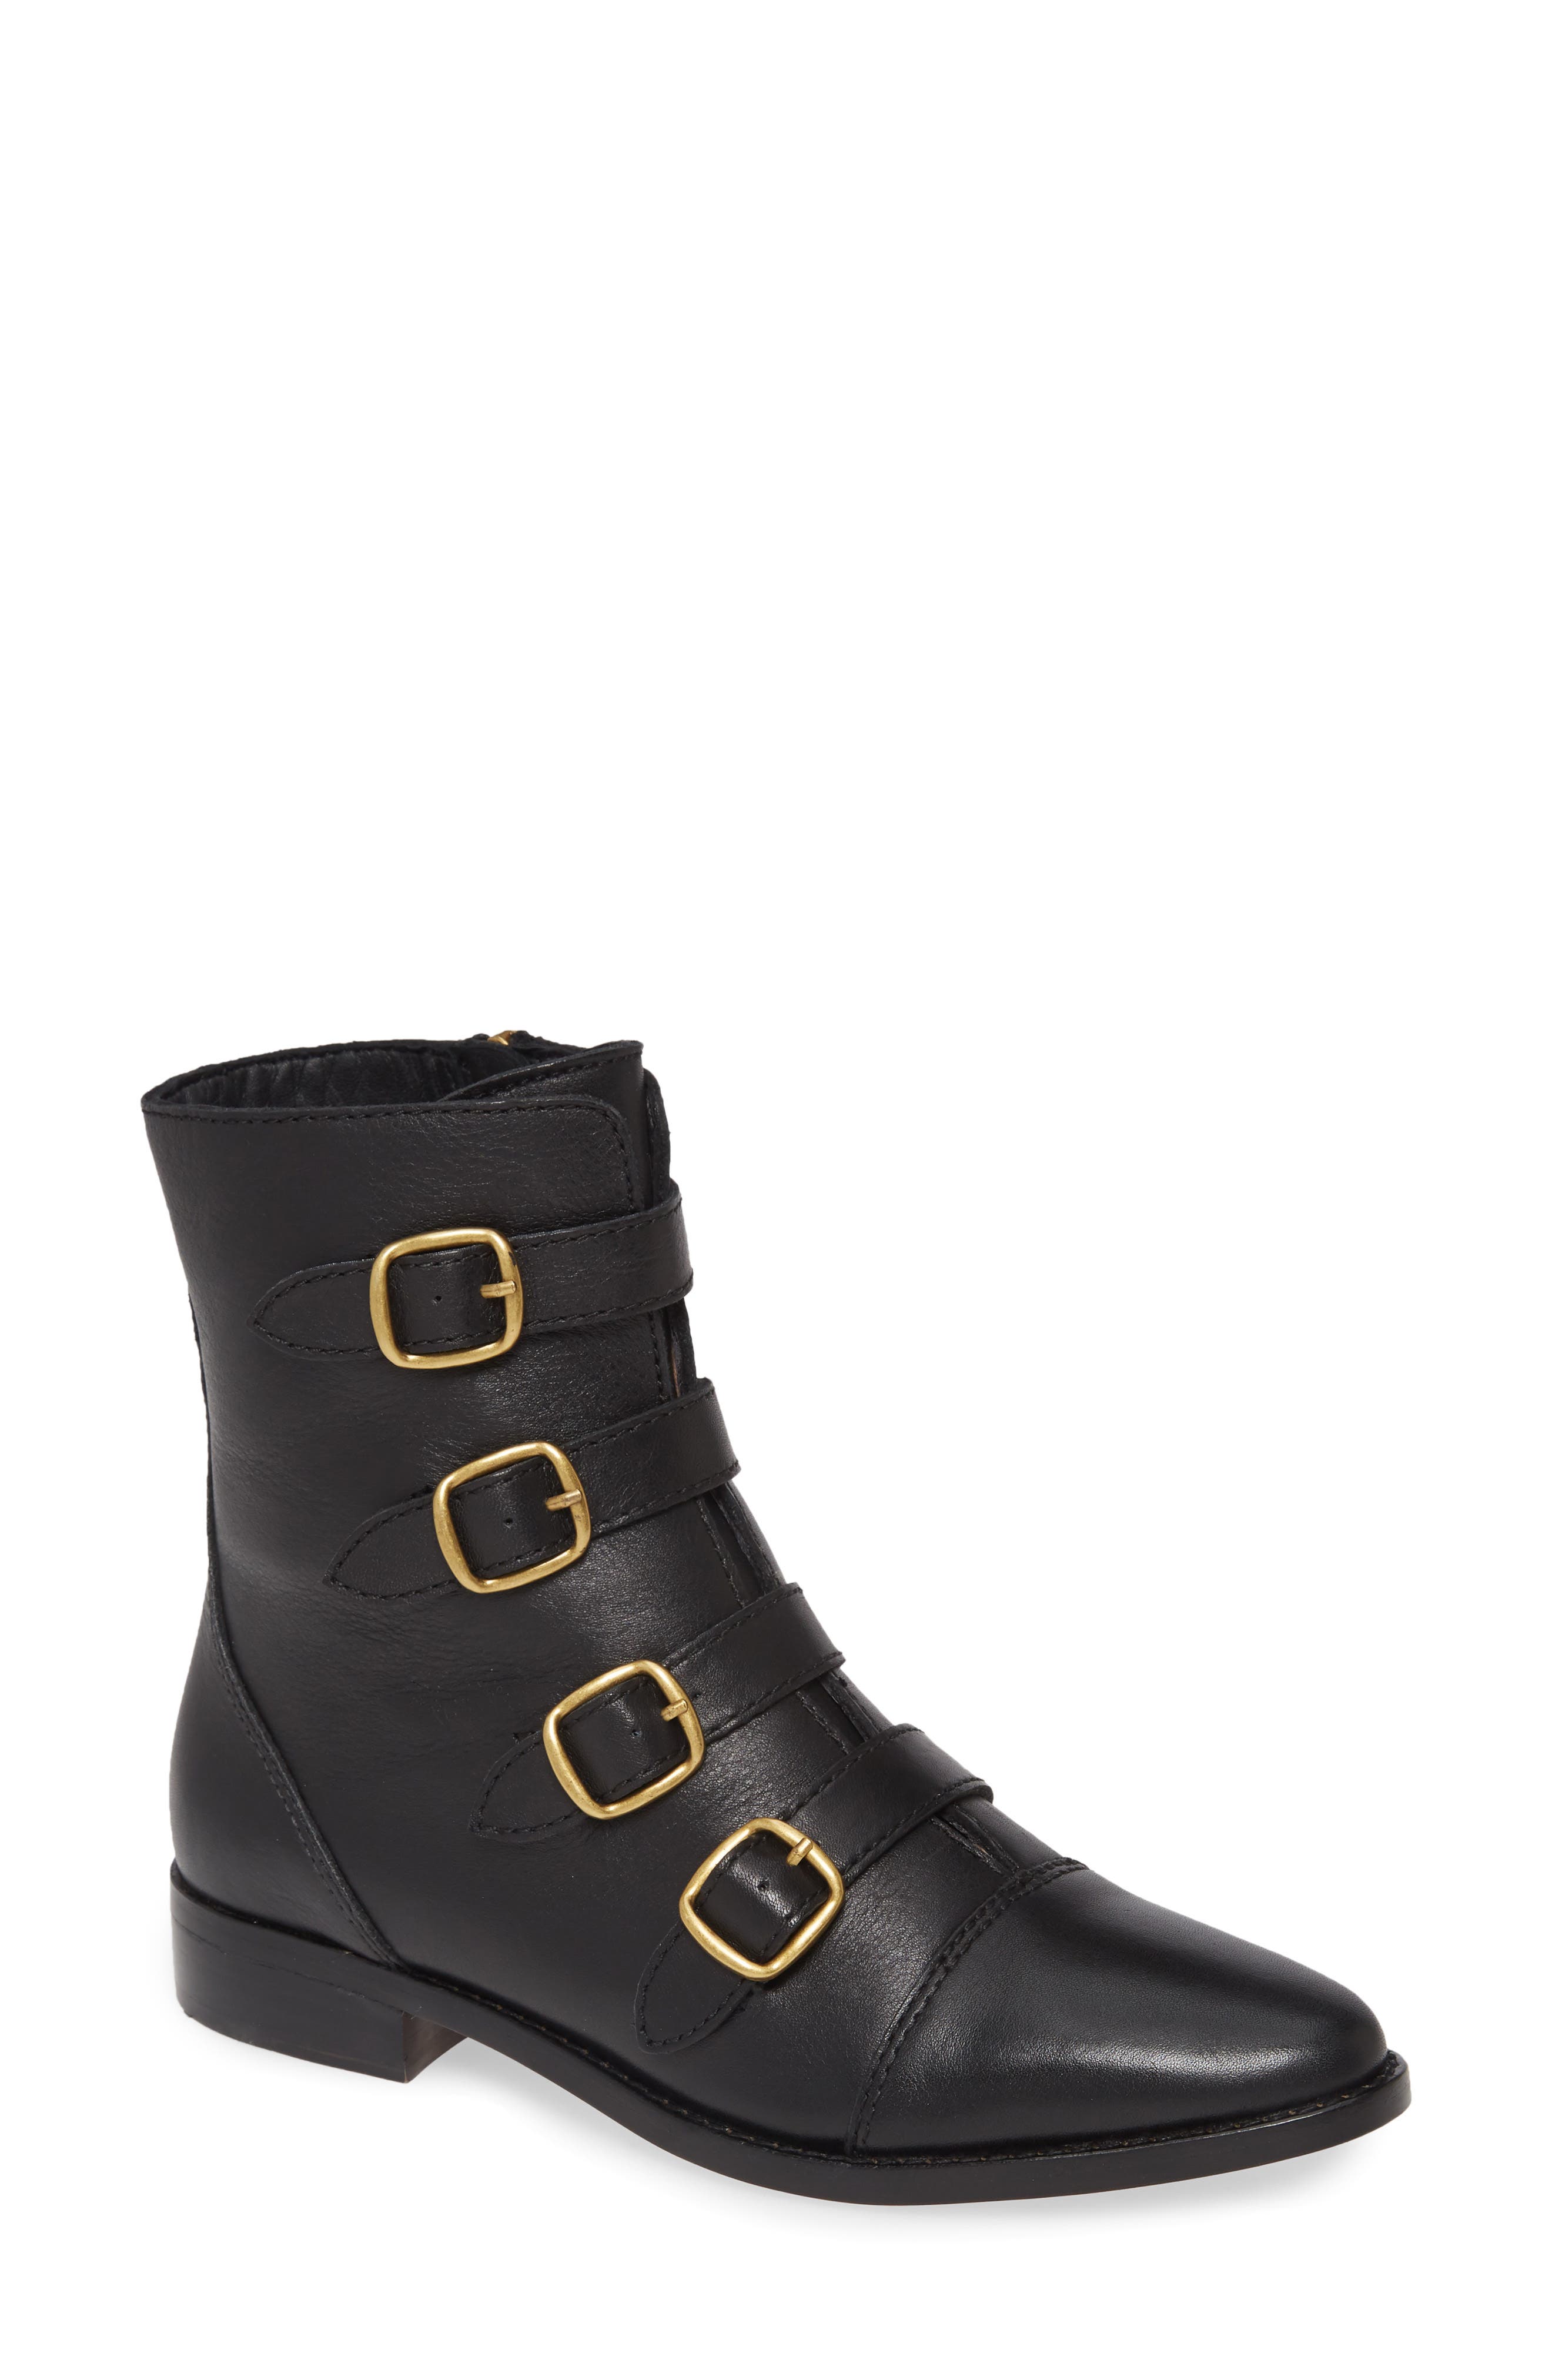 j crew leather boots